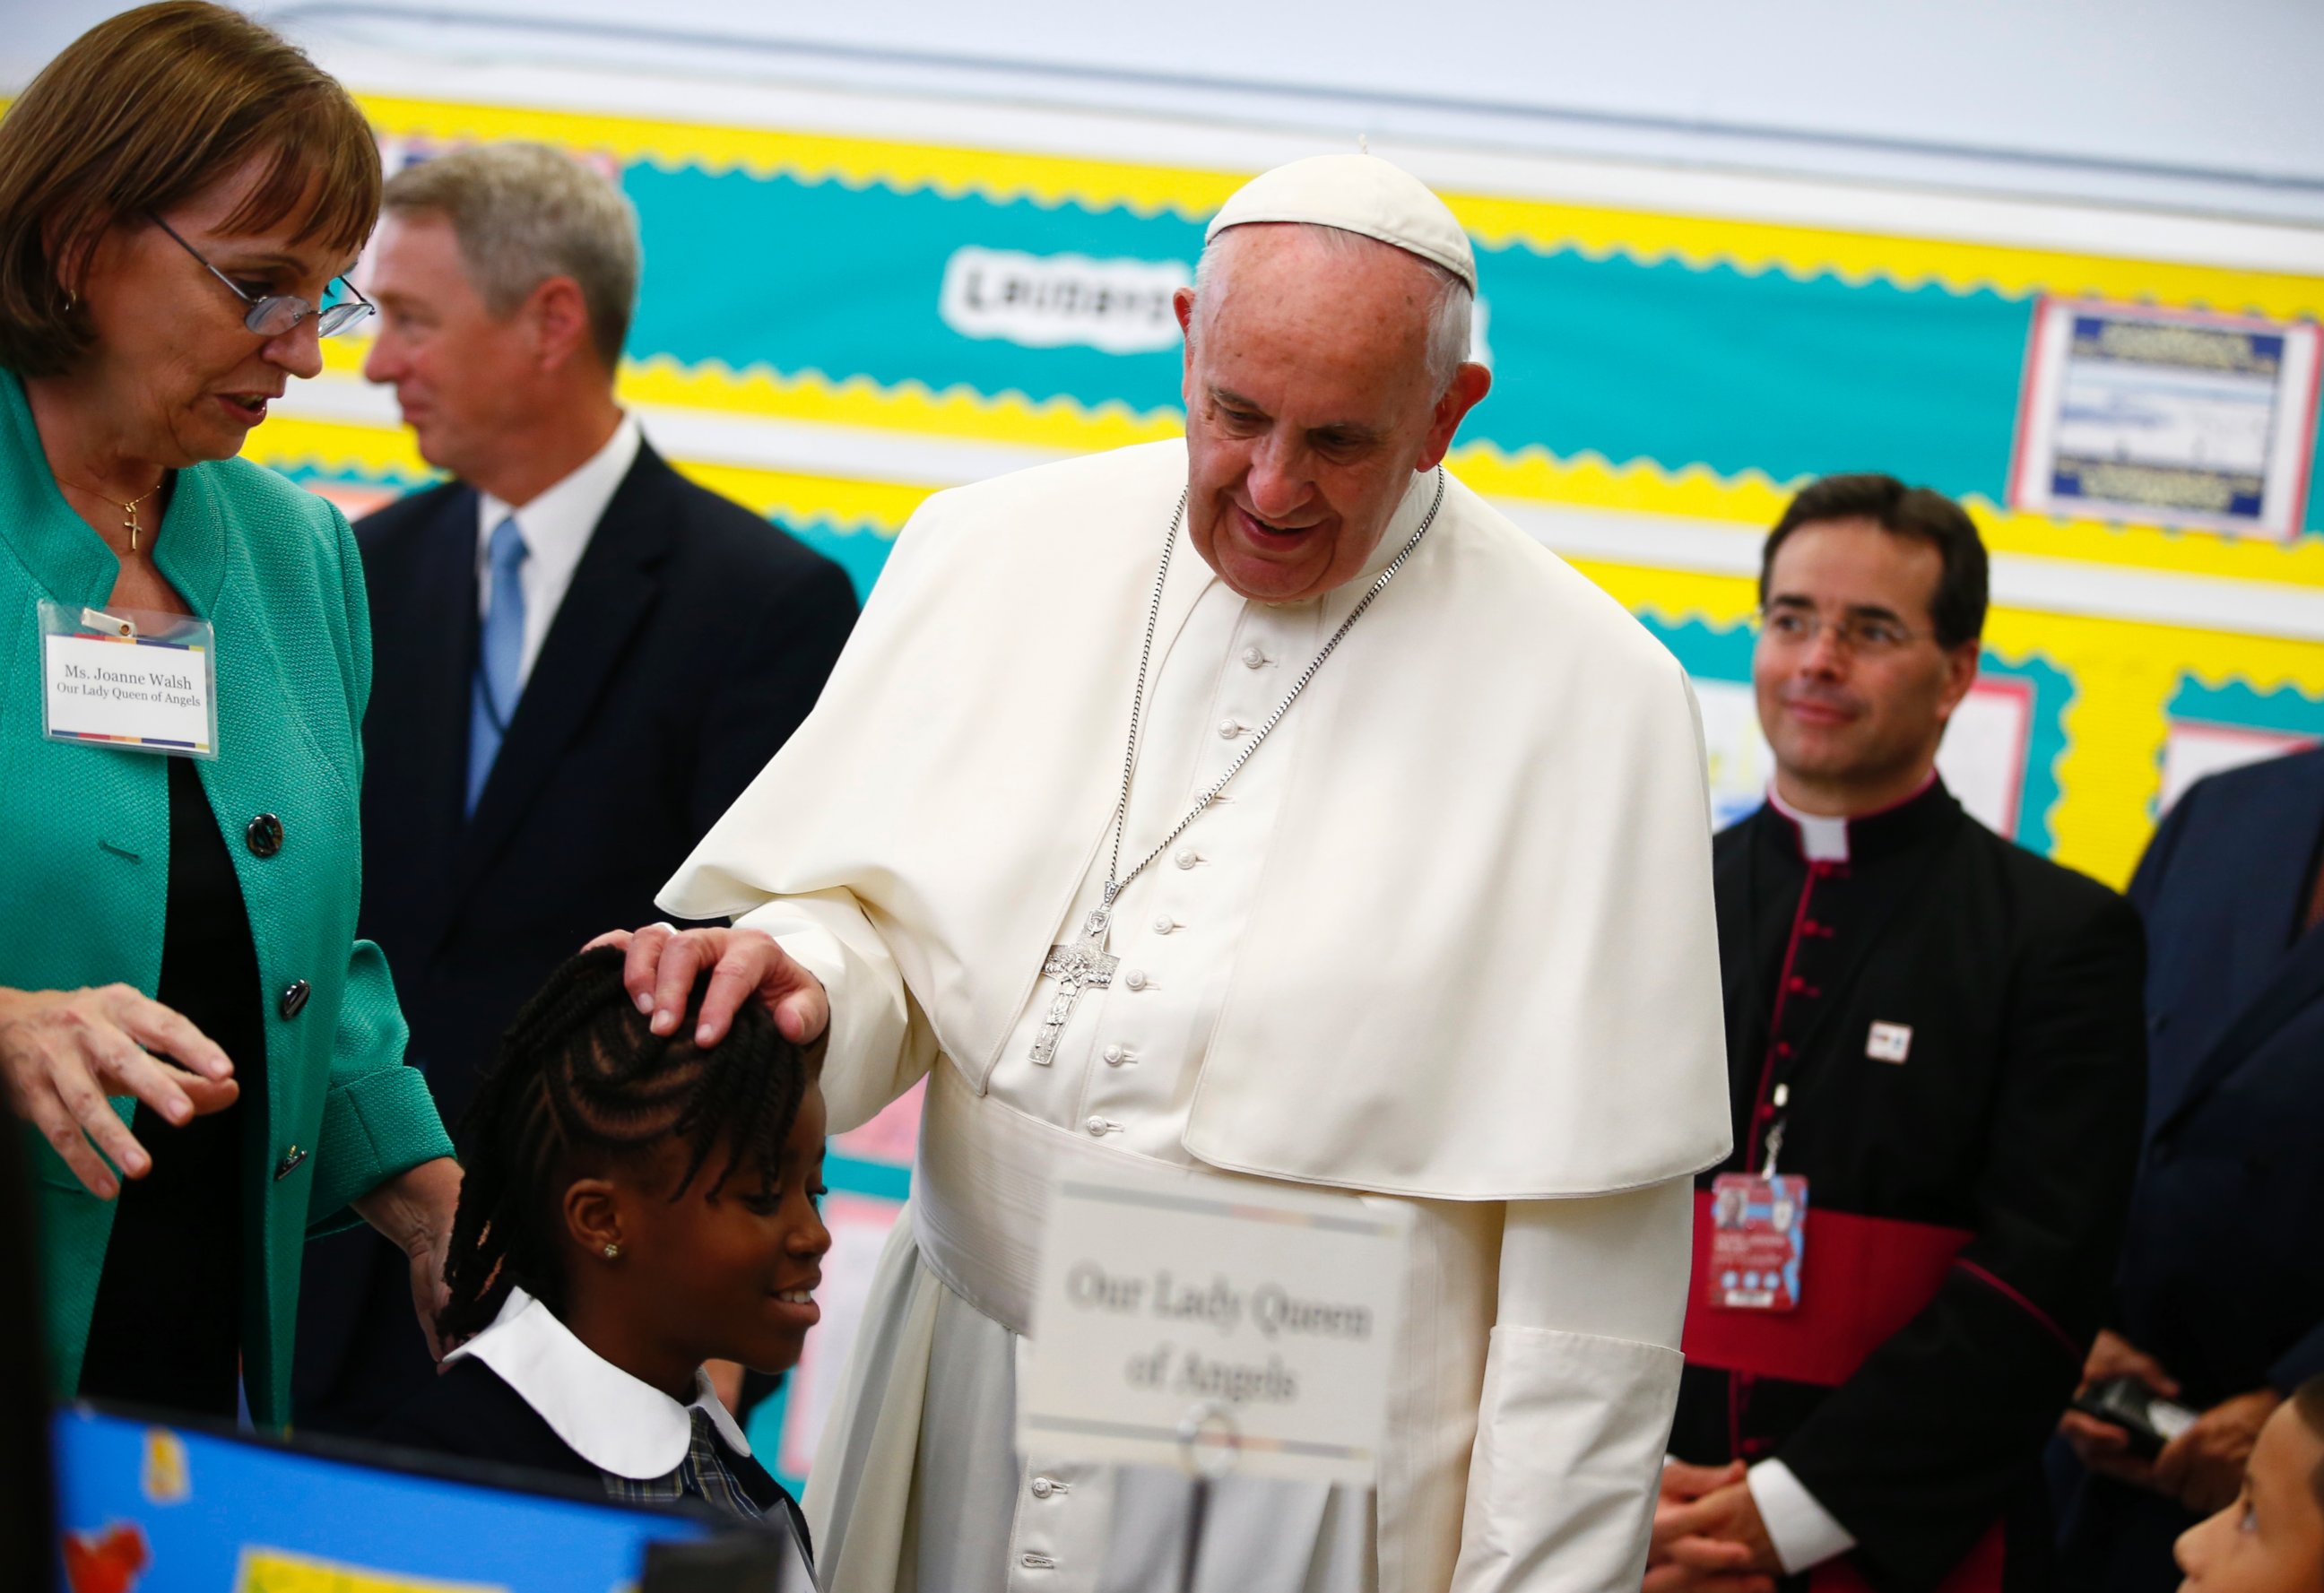 PHOTO: Pope Francis touches a student's head as he visits Our Lady Queen of Angels School in East Harlem in New York, Sept. 25, 2015. 